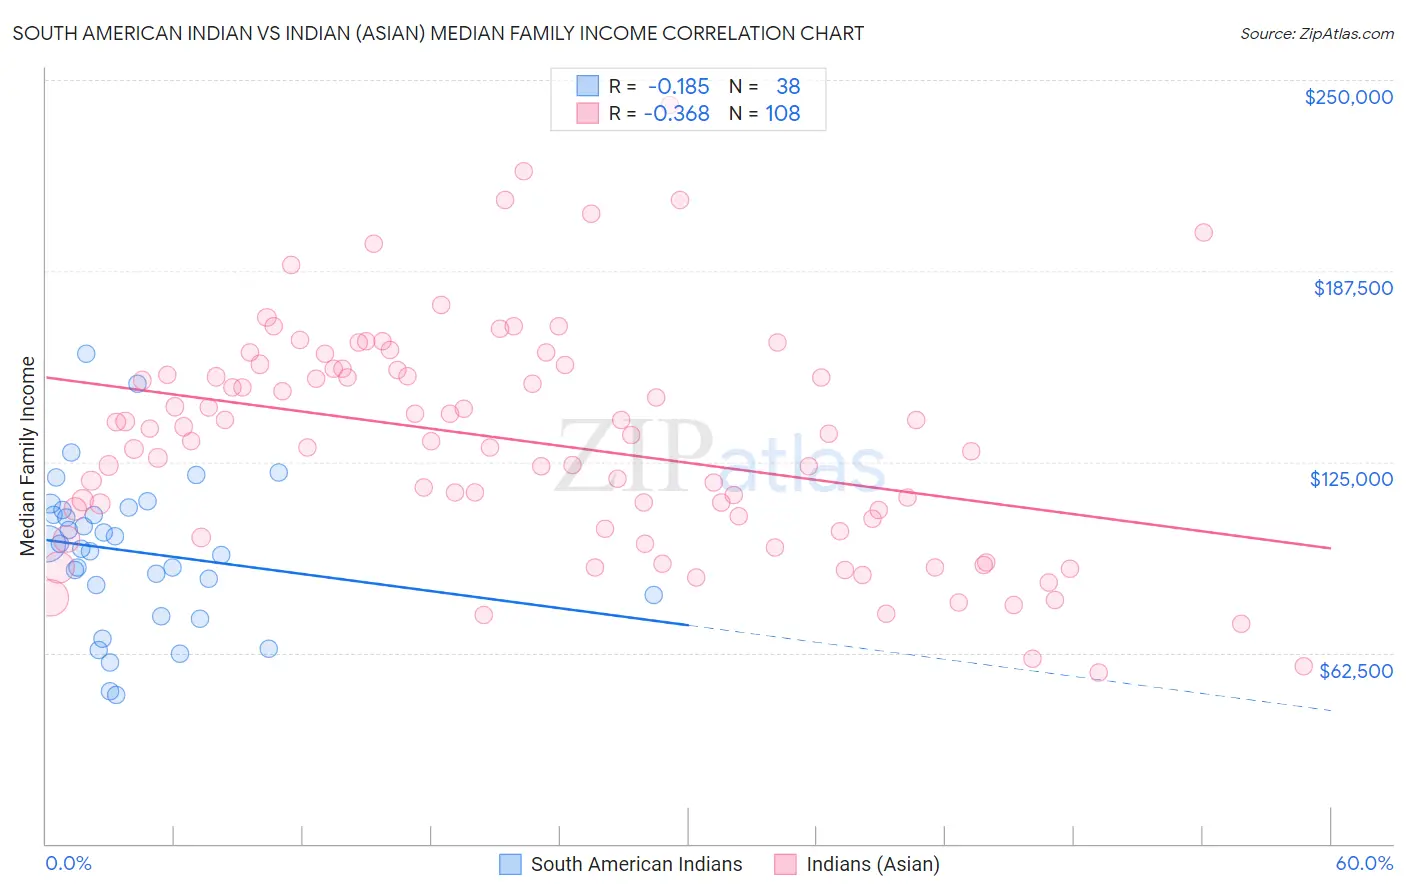 South American Indian vs Indian (Asian) Median Family Income